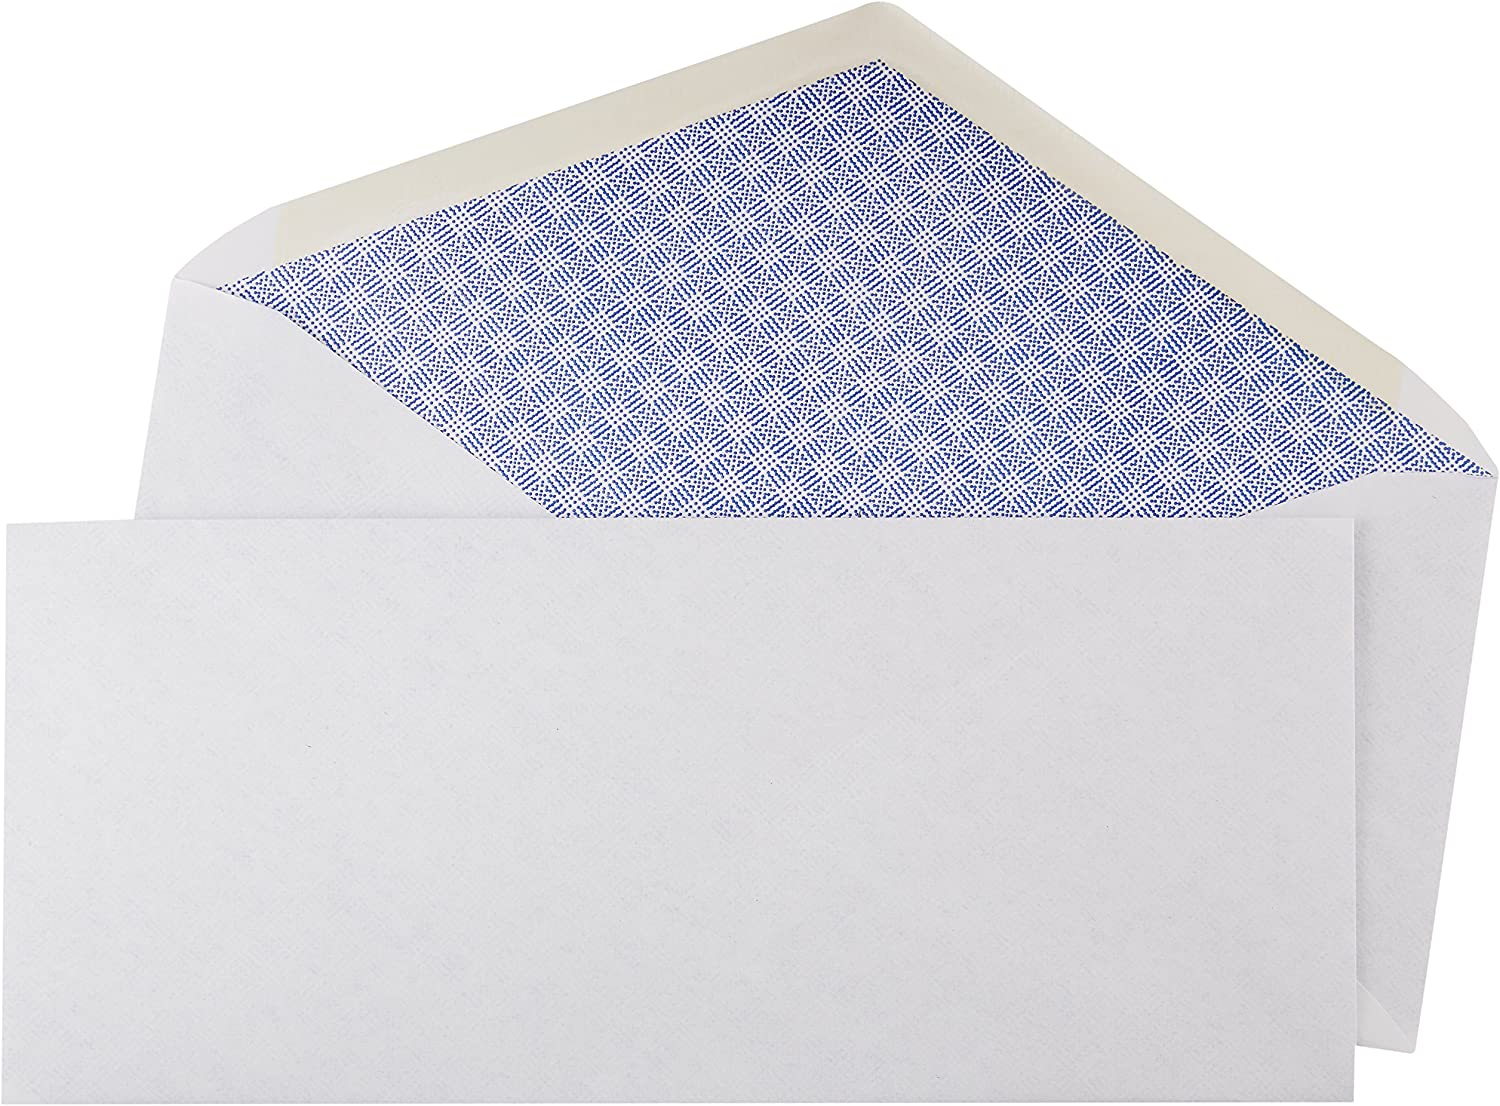 Amazon Basics #10 Security Tinted Business Envelopes, Moisture Sealed, 4 1/8-Inch x 9 1/2 Inch - Pack of 500